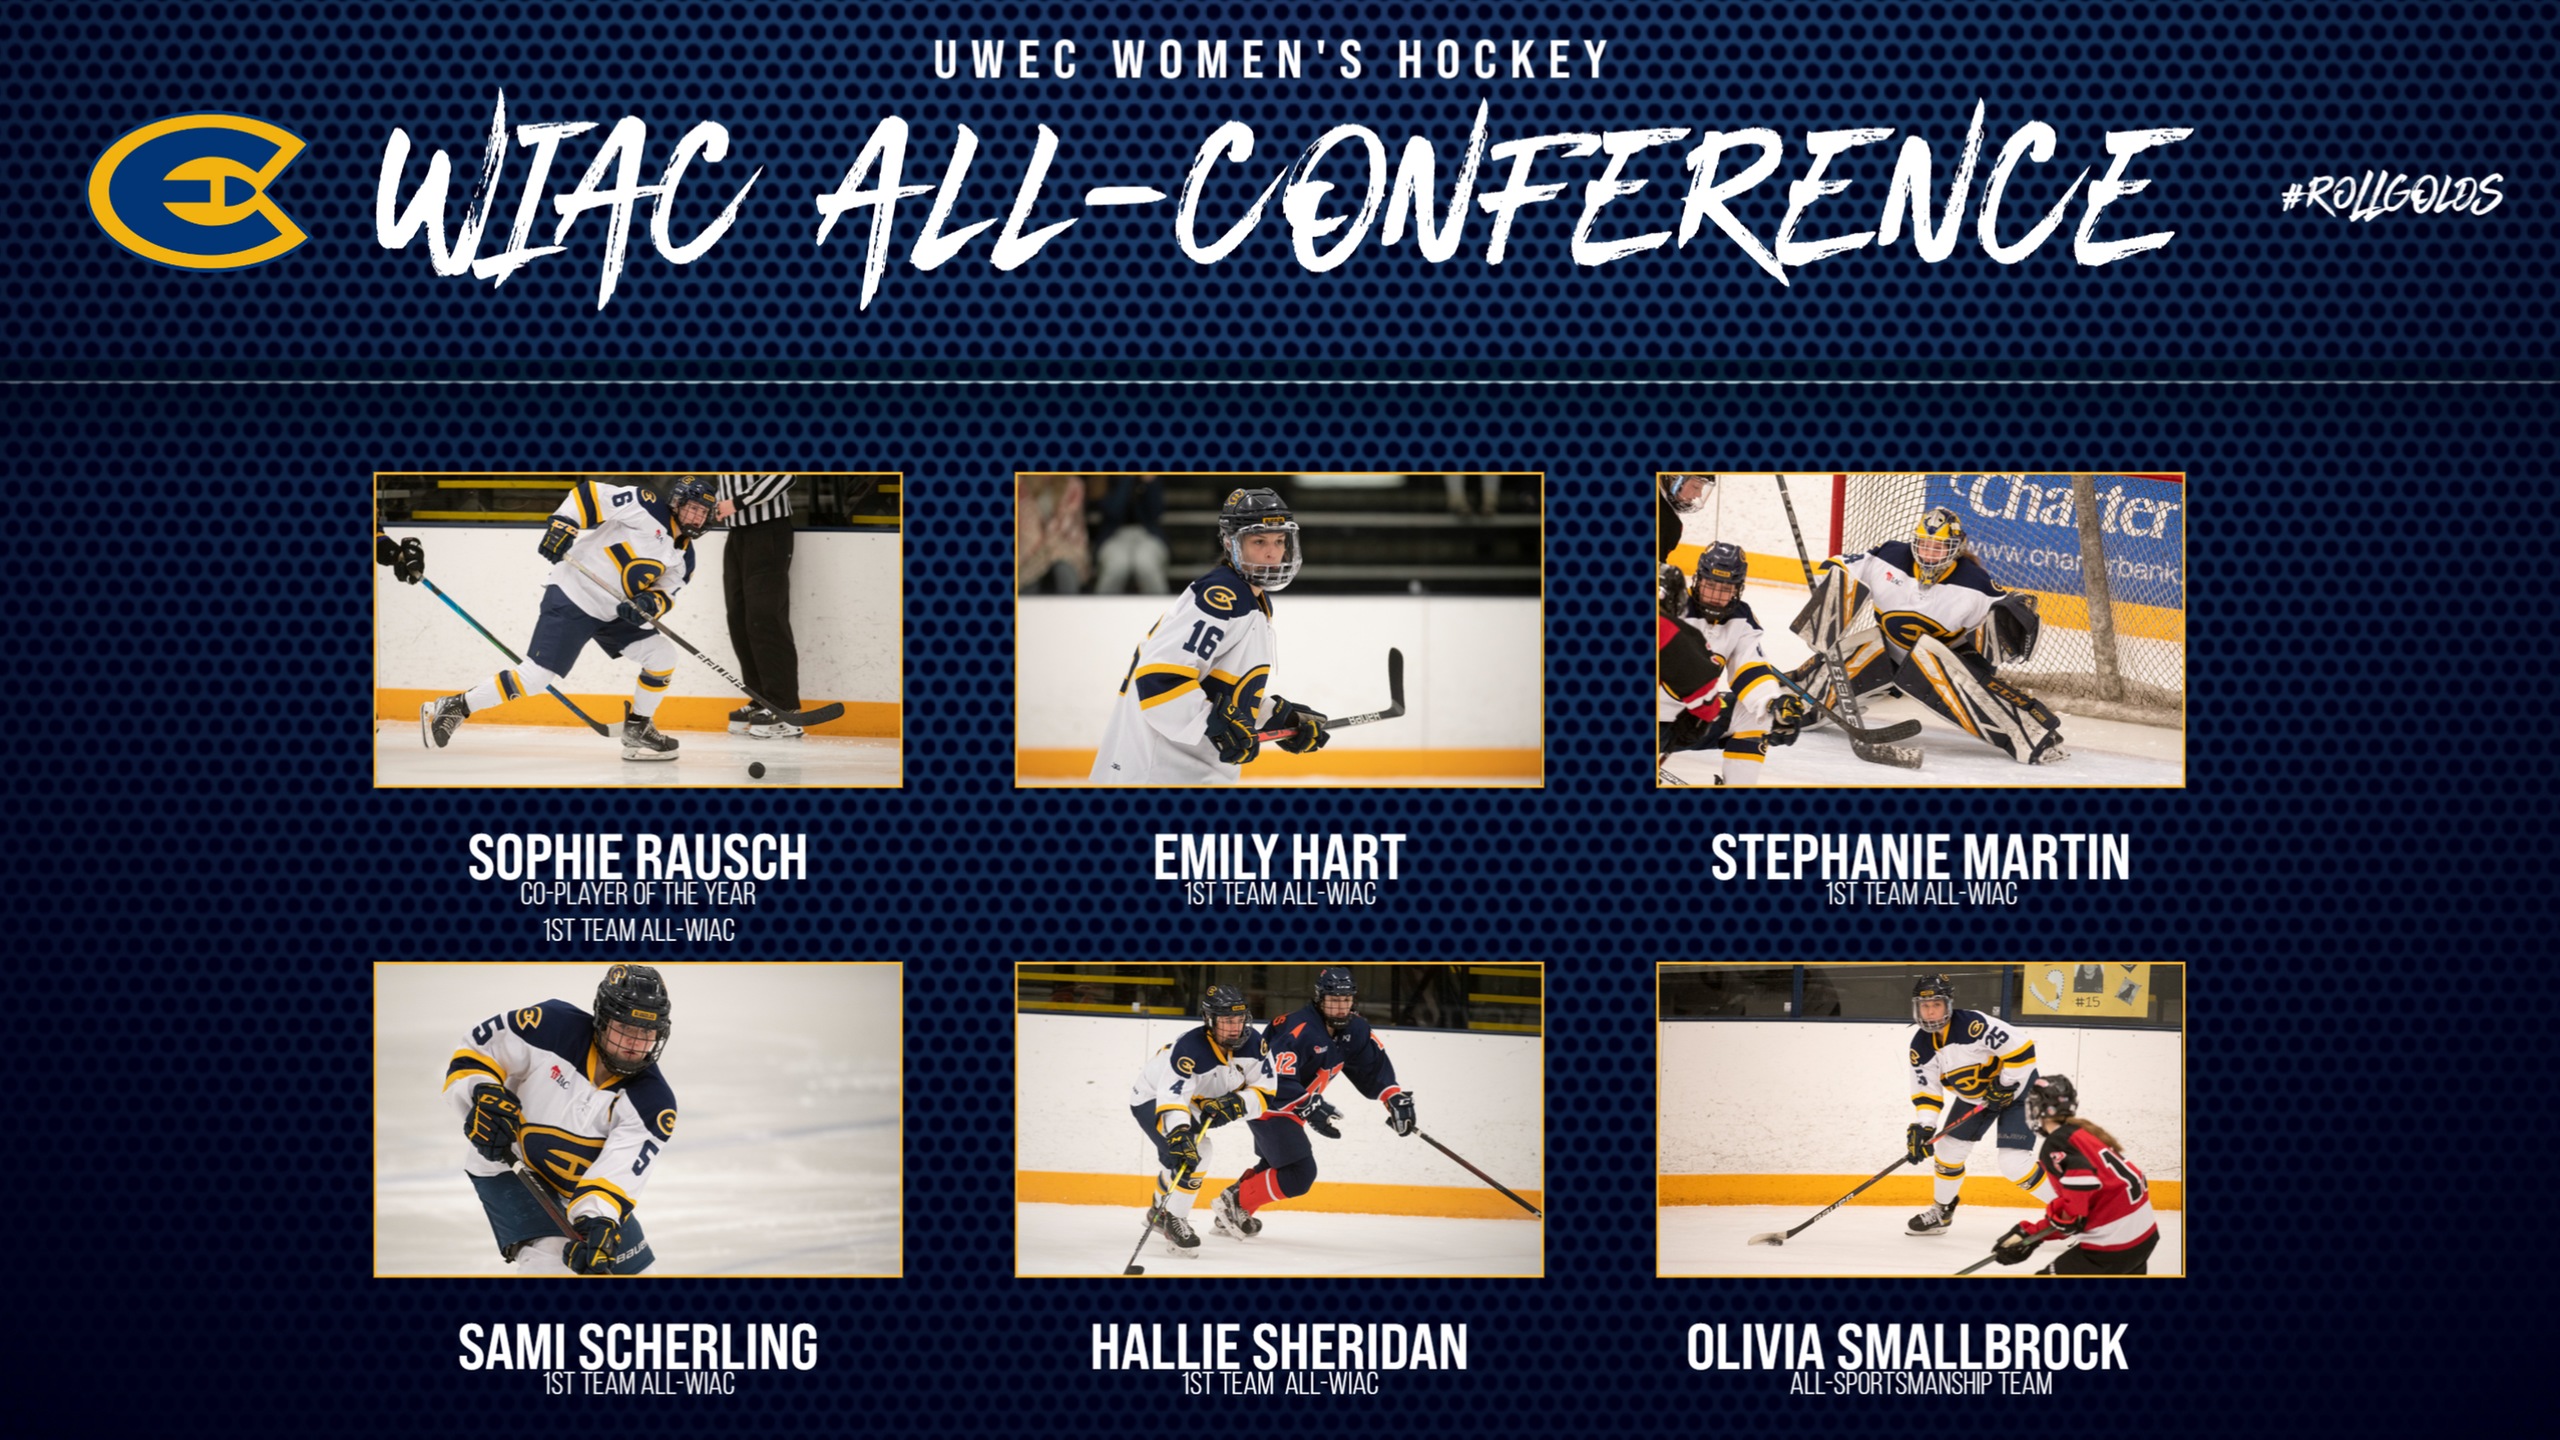 Rausch Headlines All-WIAC Honors as Co-Player of the Year